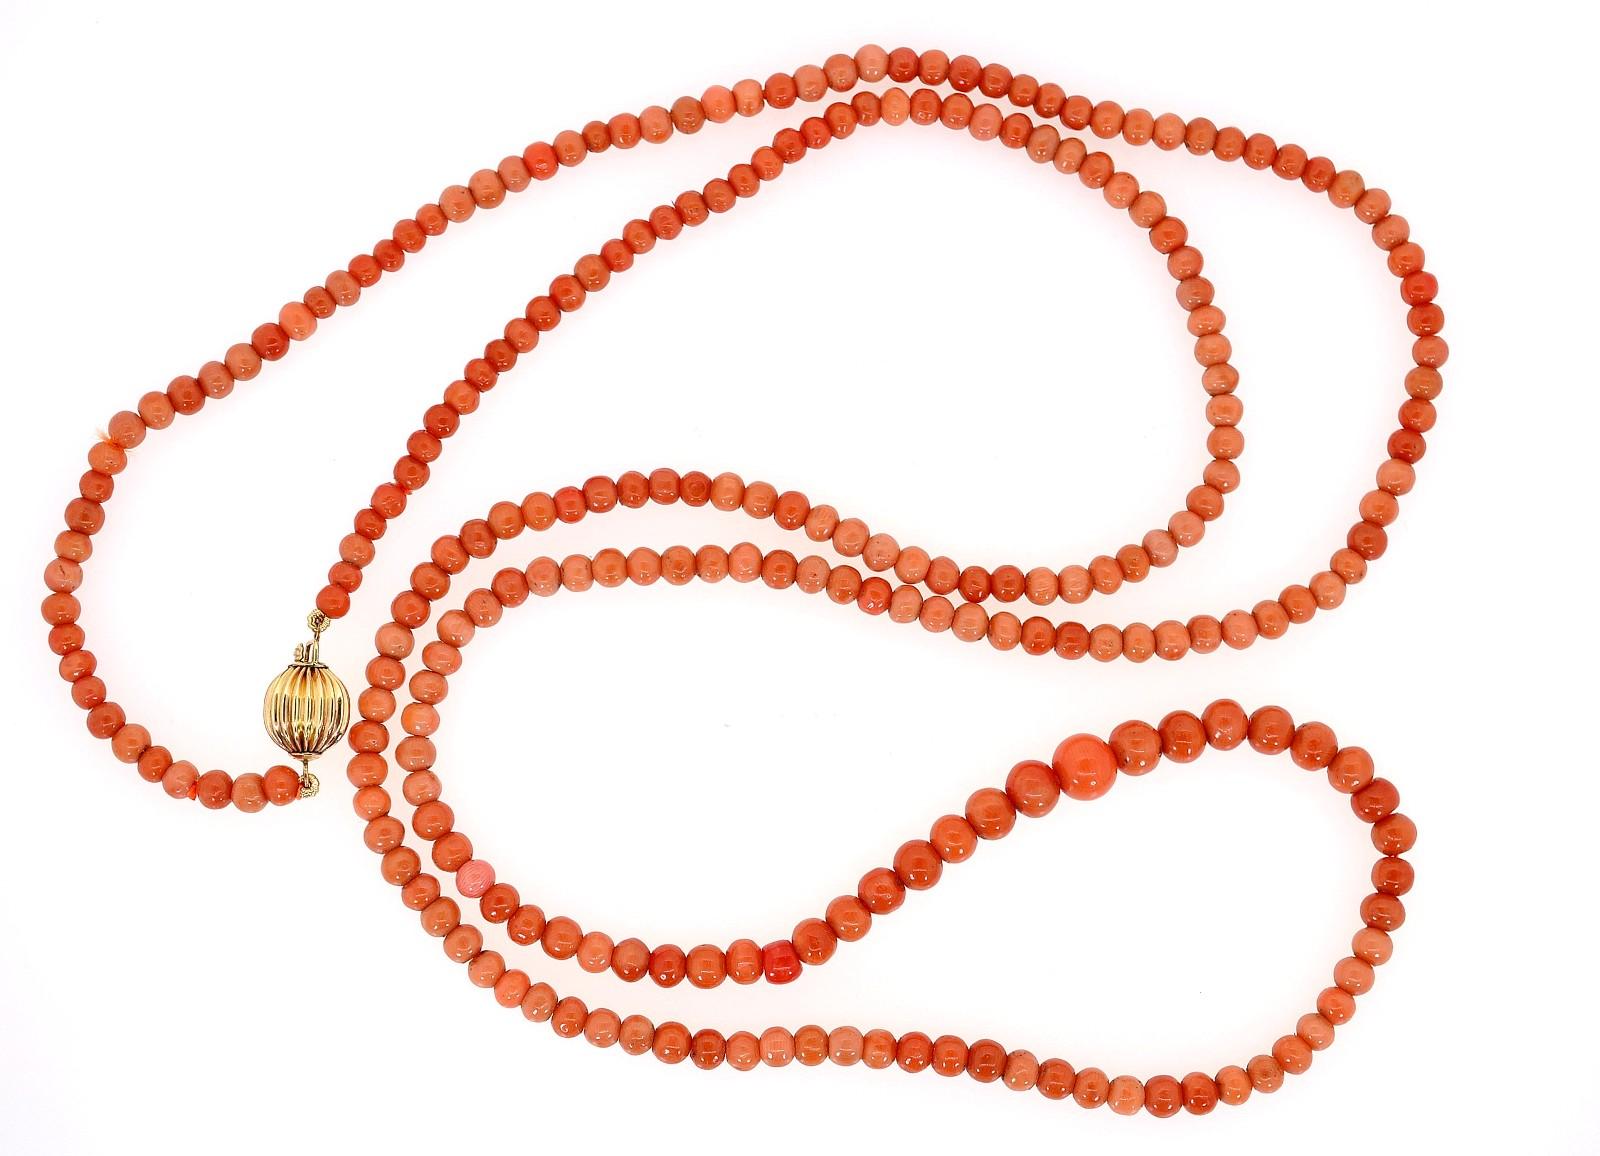 This beautiful long strand features 250 soft and dark salmon color Coral beads.  The recently re-strong 1930's strands measures 38 inch long, making it easy to be worn nestled into two strands or simply leave it at length.  A contemporary round 14KT